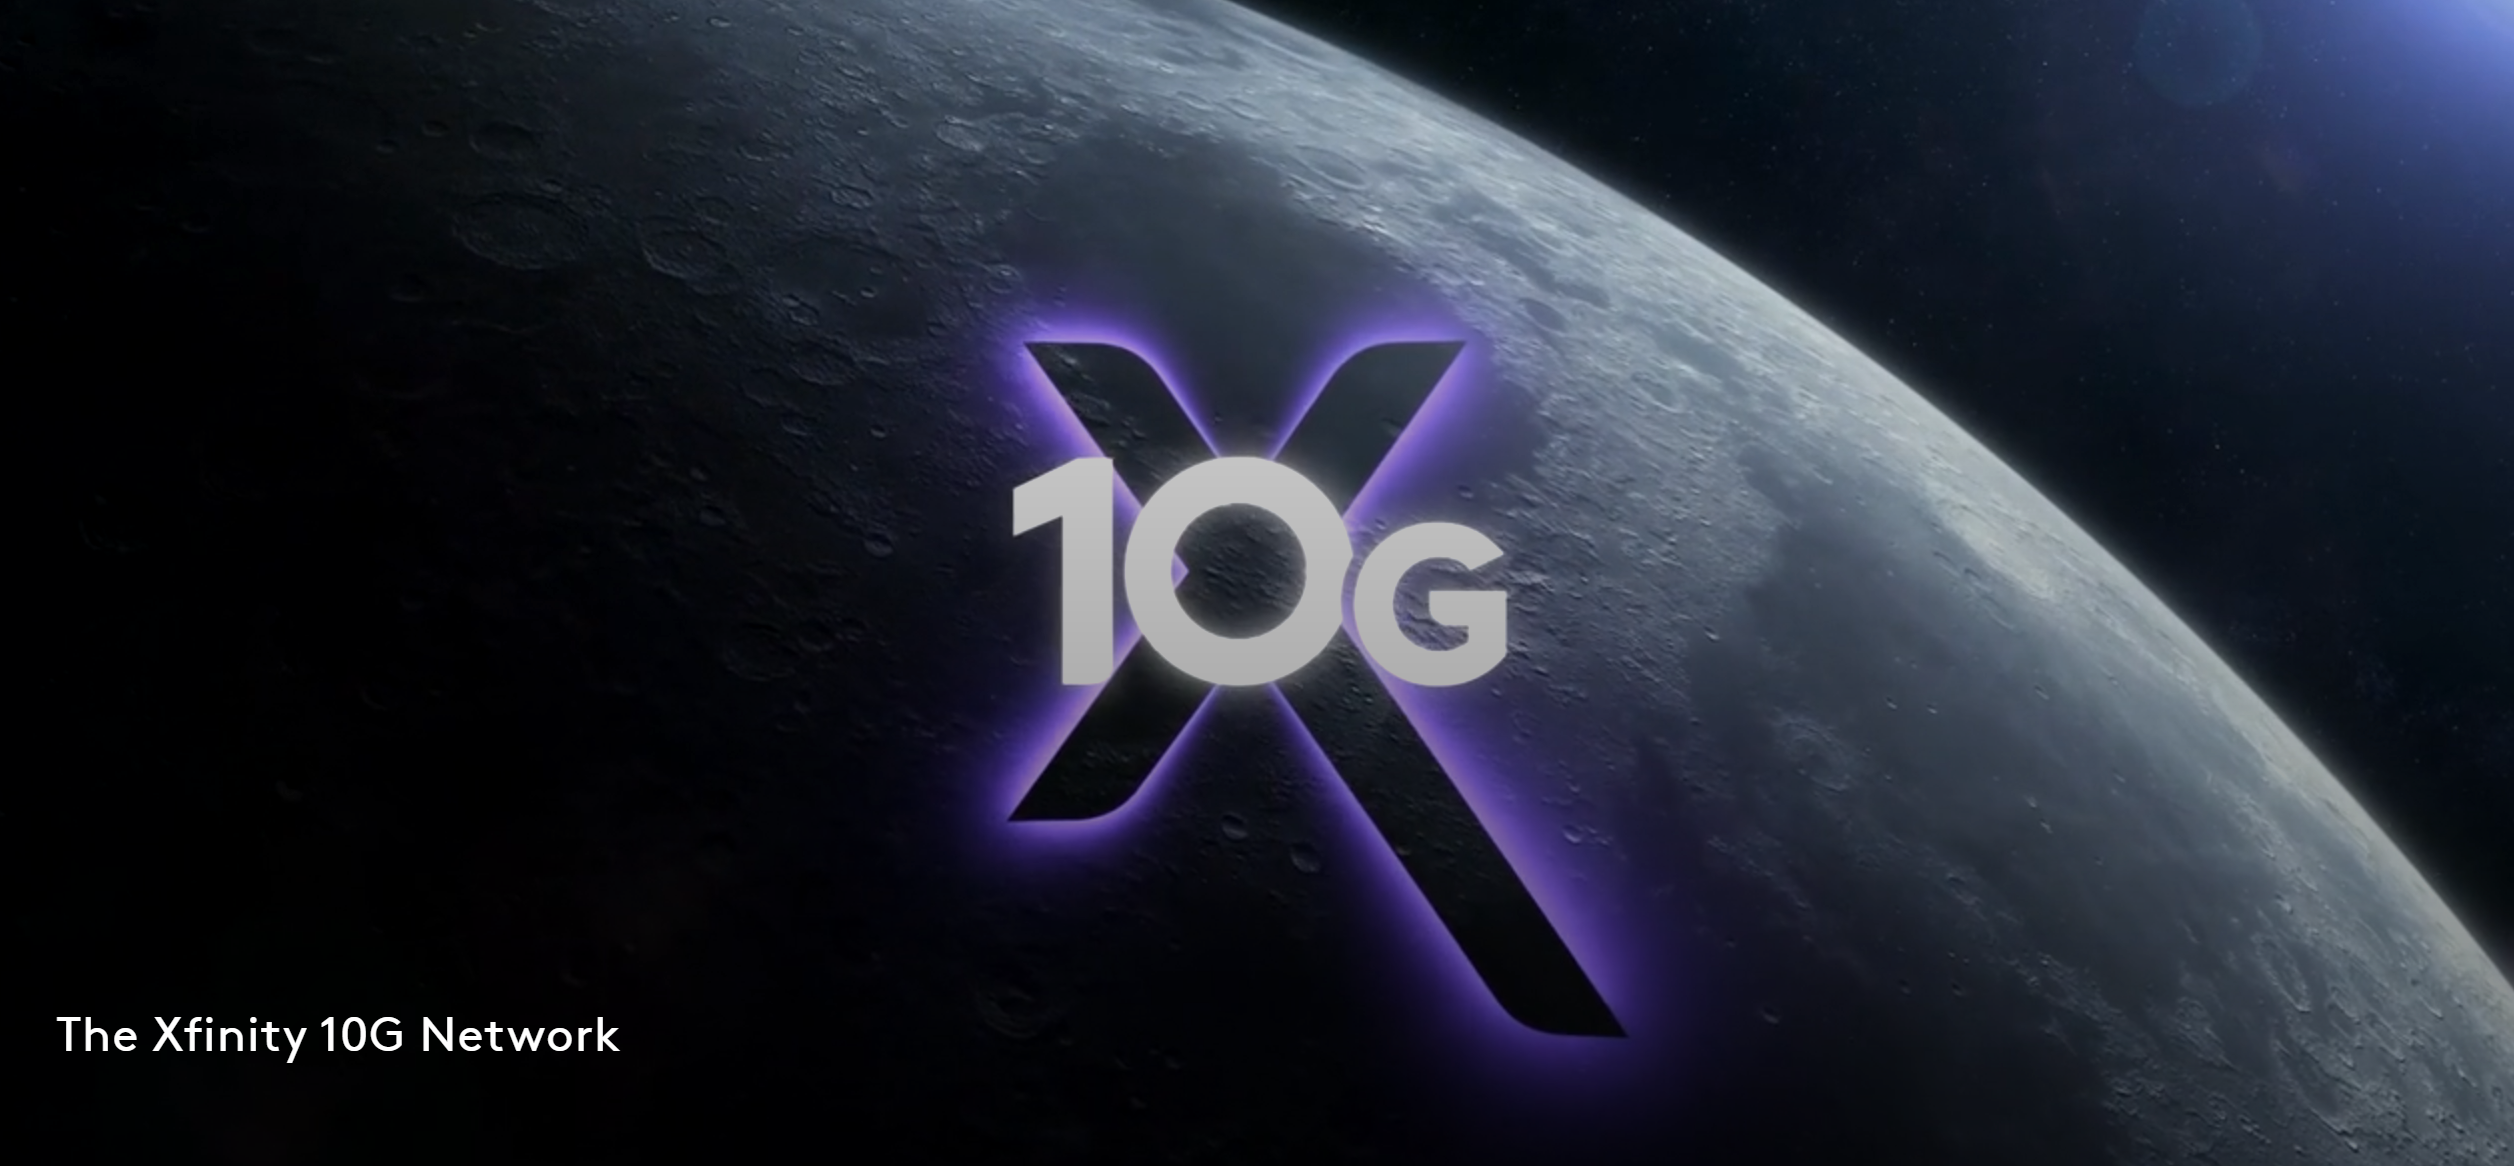 The text ‘10G’ sitting on a background image of the moon in space